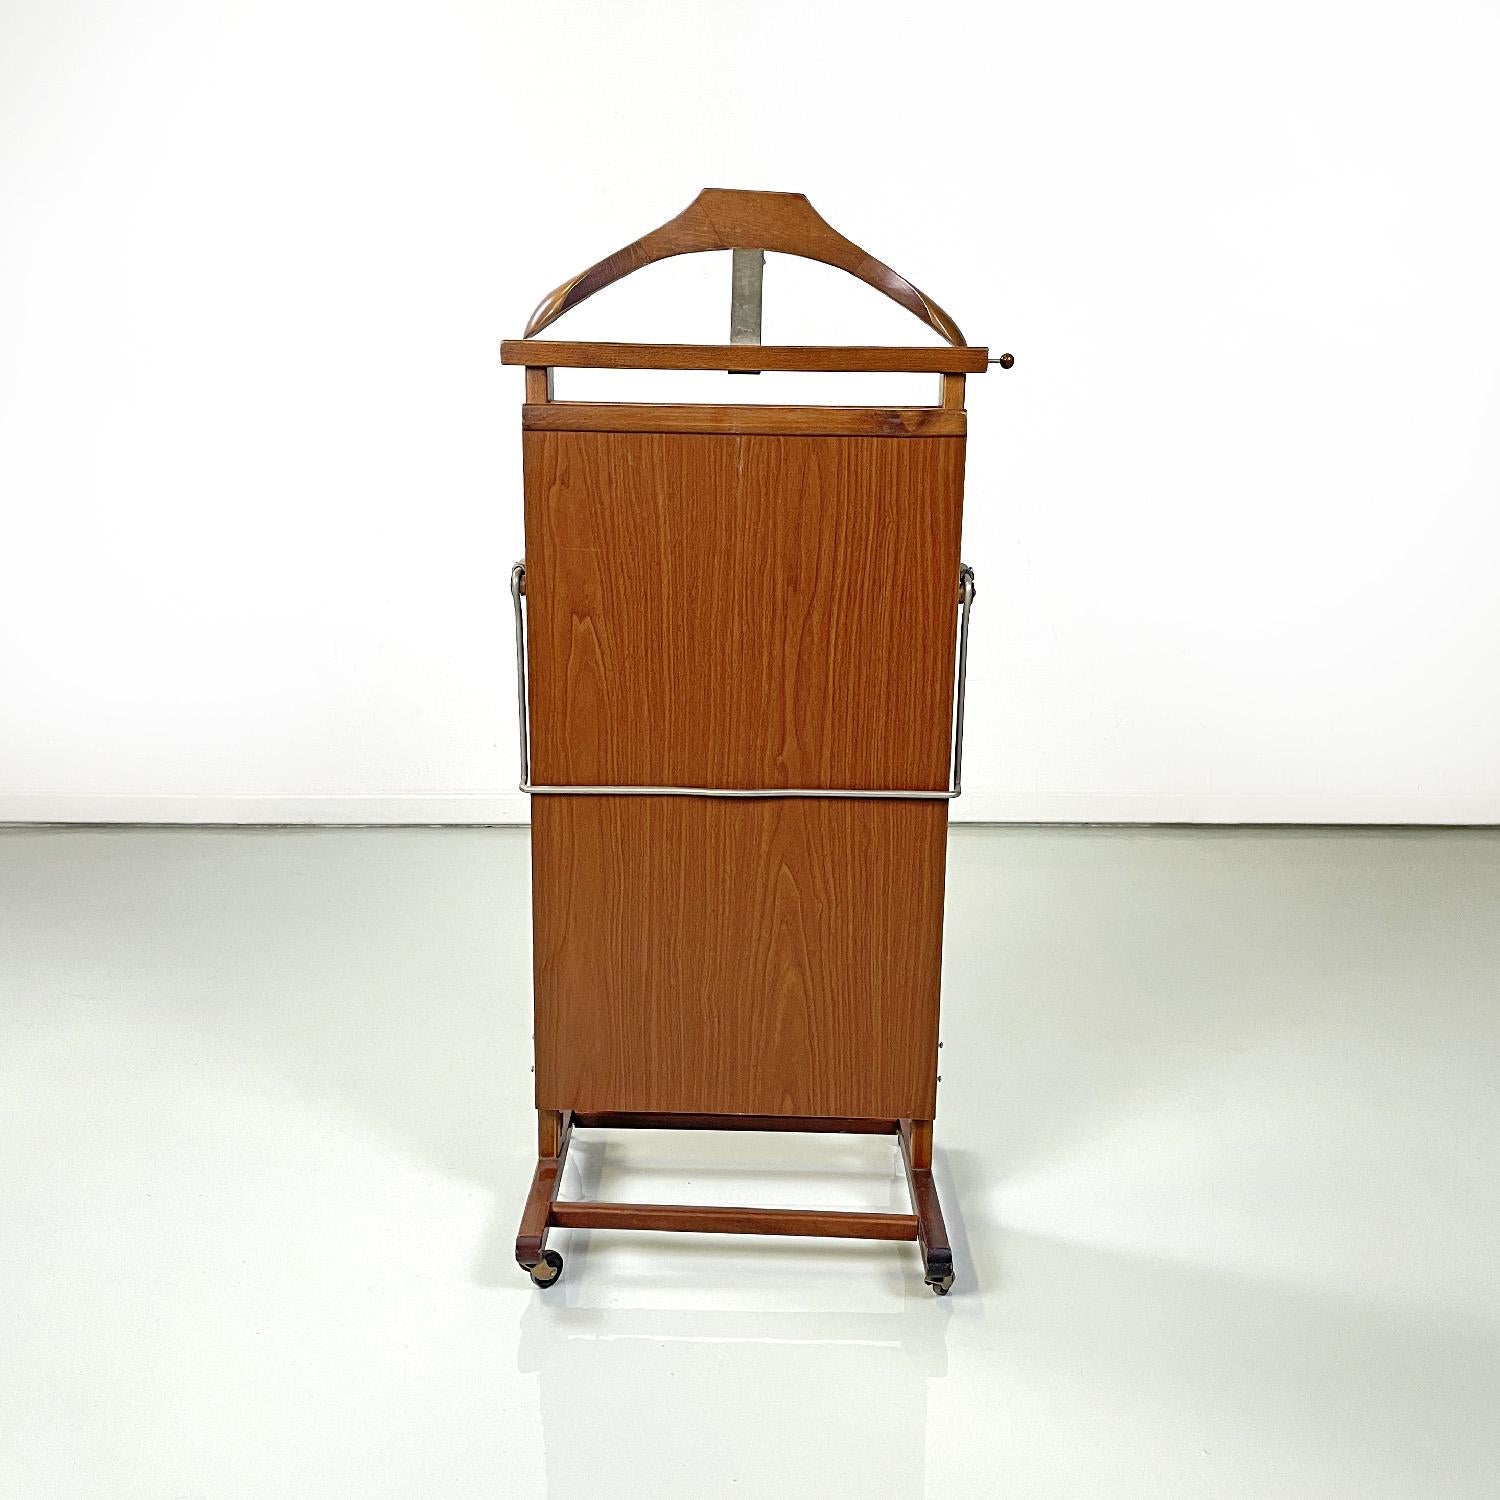 Italian mid-century modern wooden valet stand by Fratelli Reguitti, 1960s
Wooden valet stand or clothes hangers with rectangular base. The main structure is rectangular and on one side has a top of the same size which opens and locks thanks to a